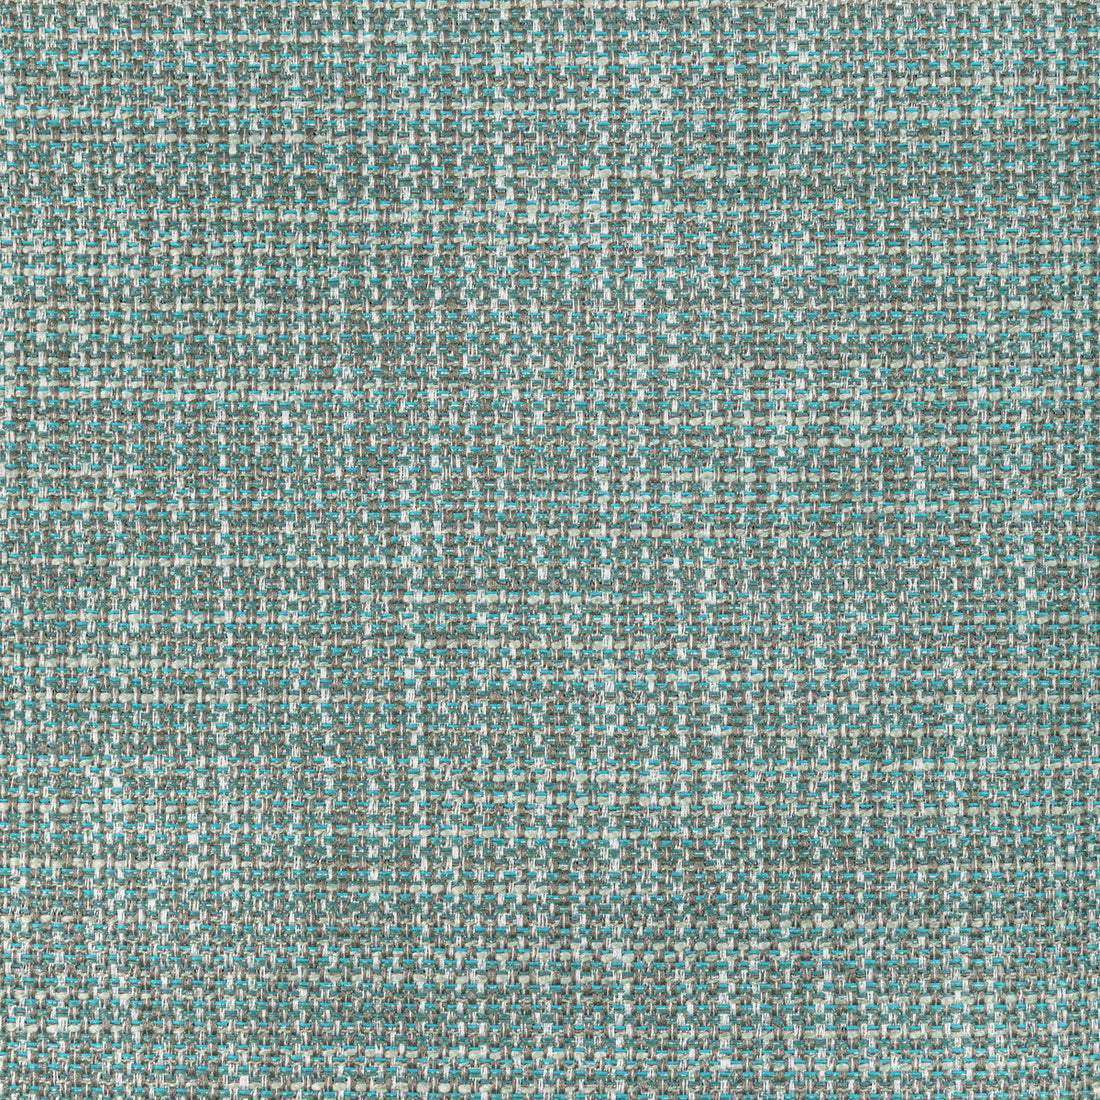 Luma Texture fabric in pool color - pattern 4947.1311.0 - by Kravet Contract in the Fr Window Luma Texture collection